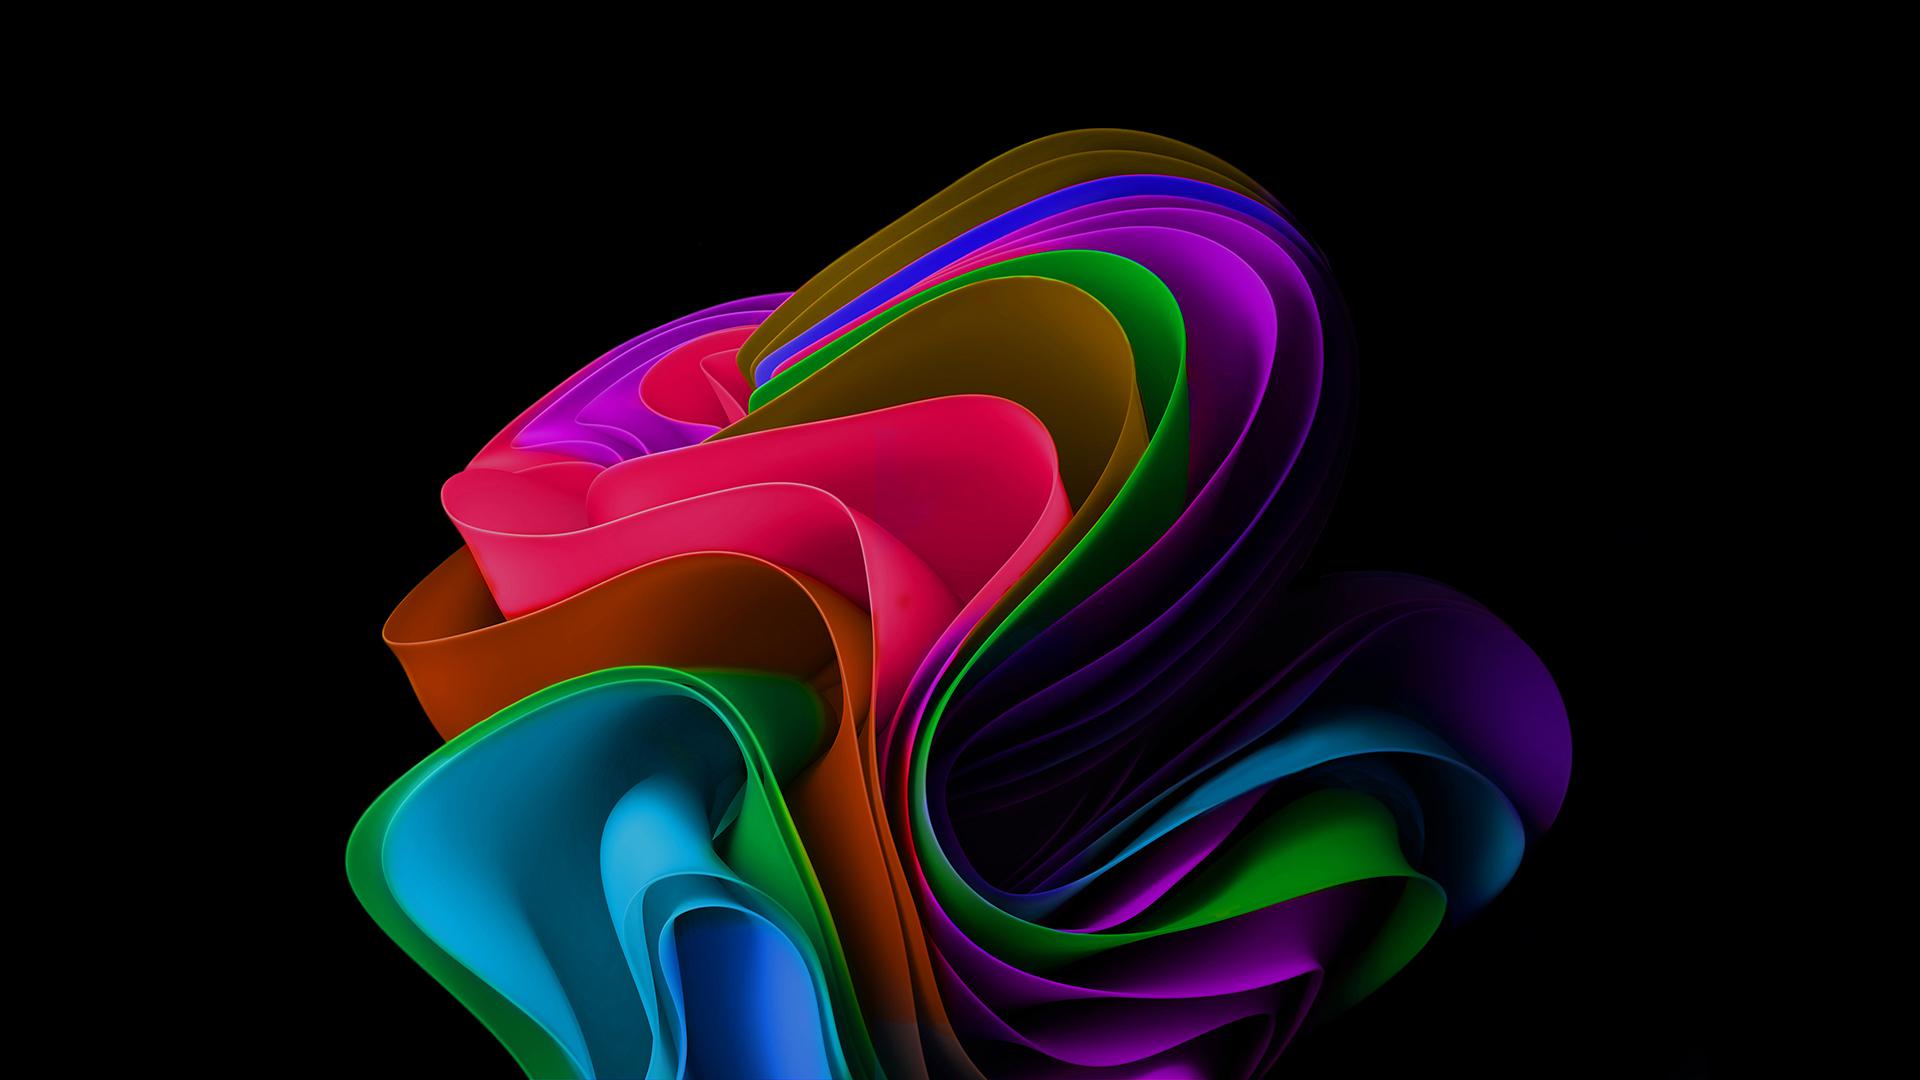 3D colorful abstract wallpaper with black background - Windows 11